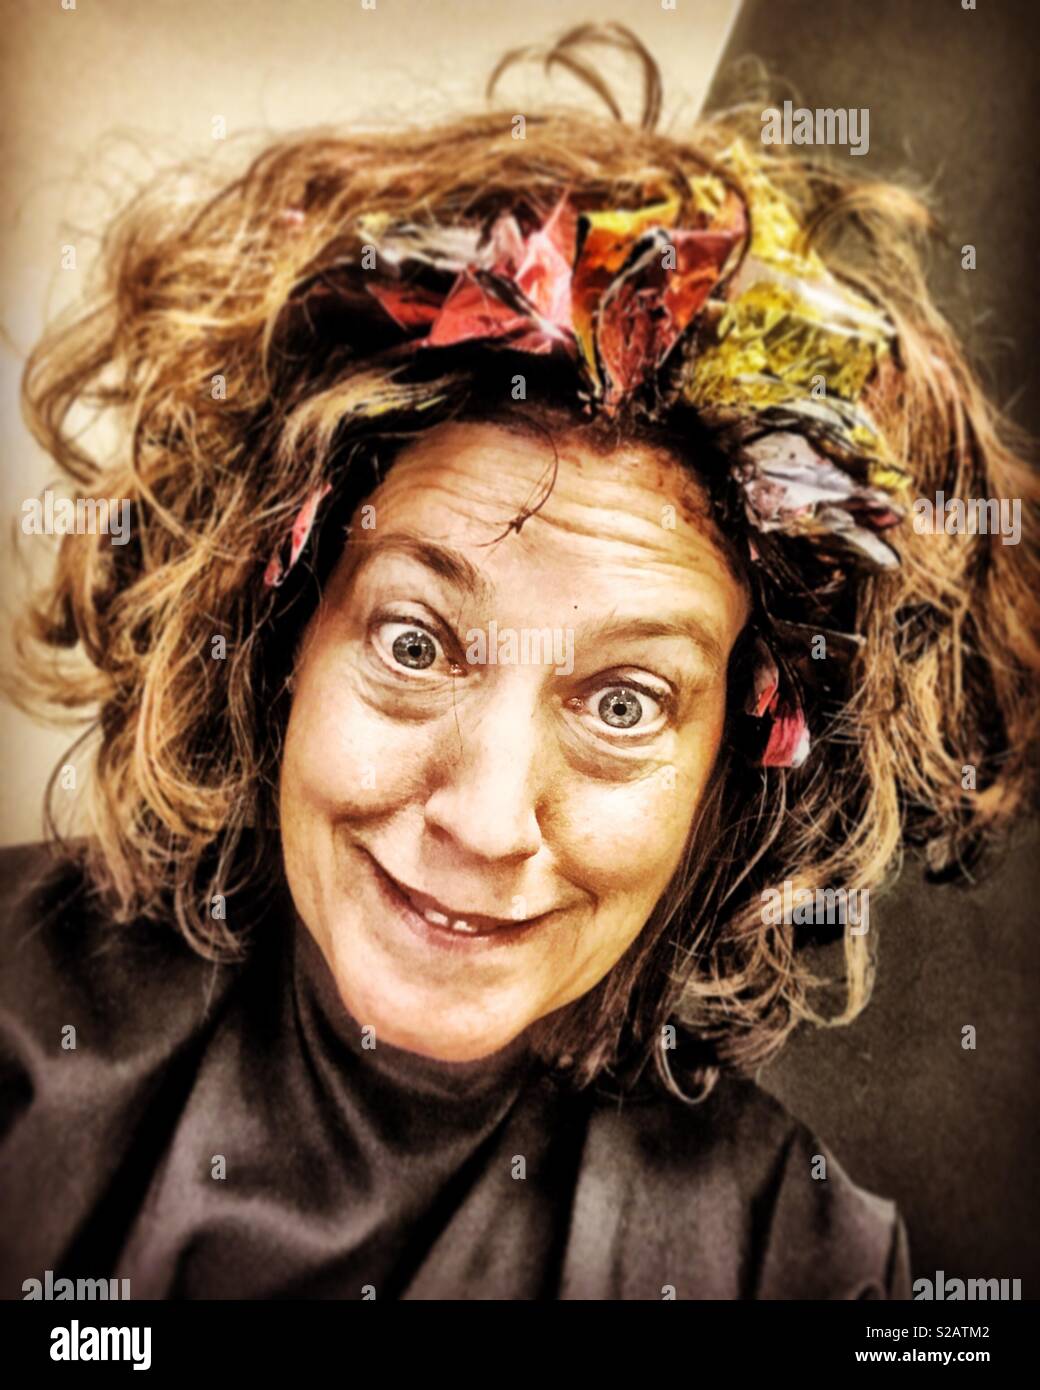 Crazy woman gets hair colored at beauty salon Stock Photo